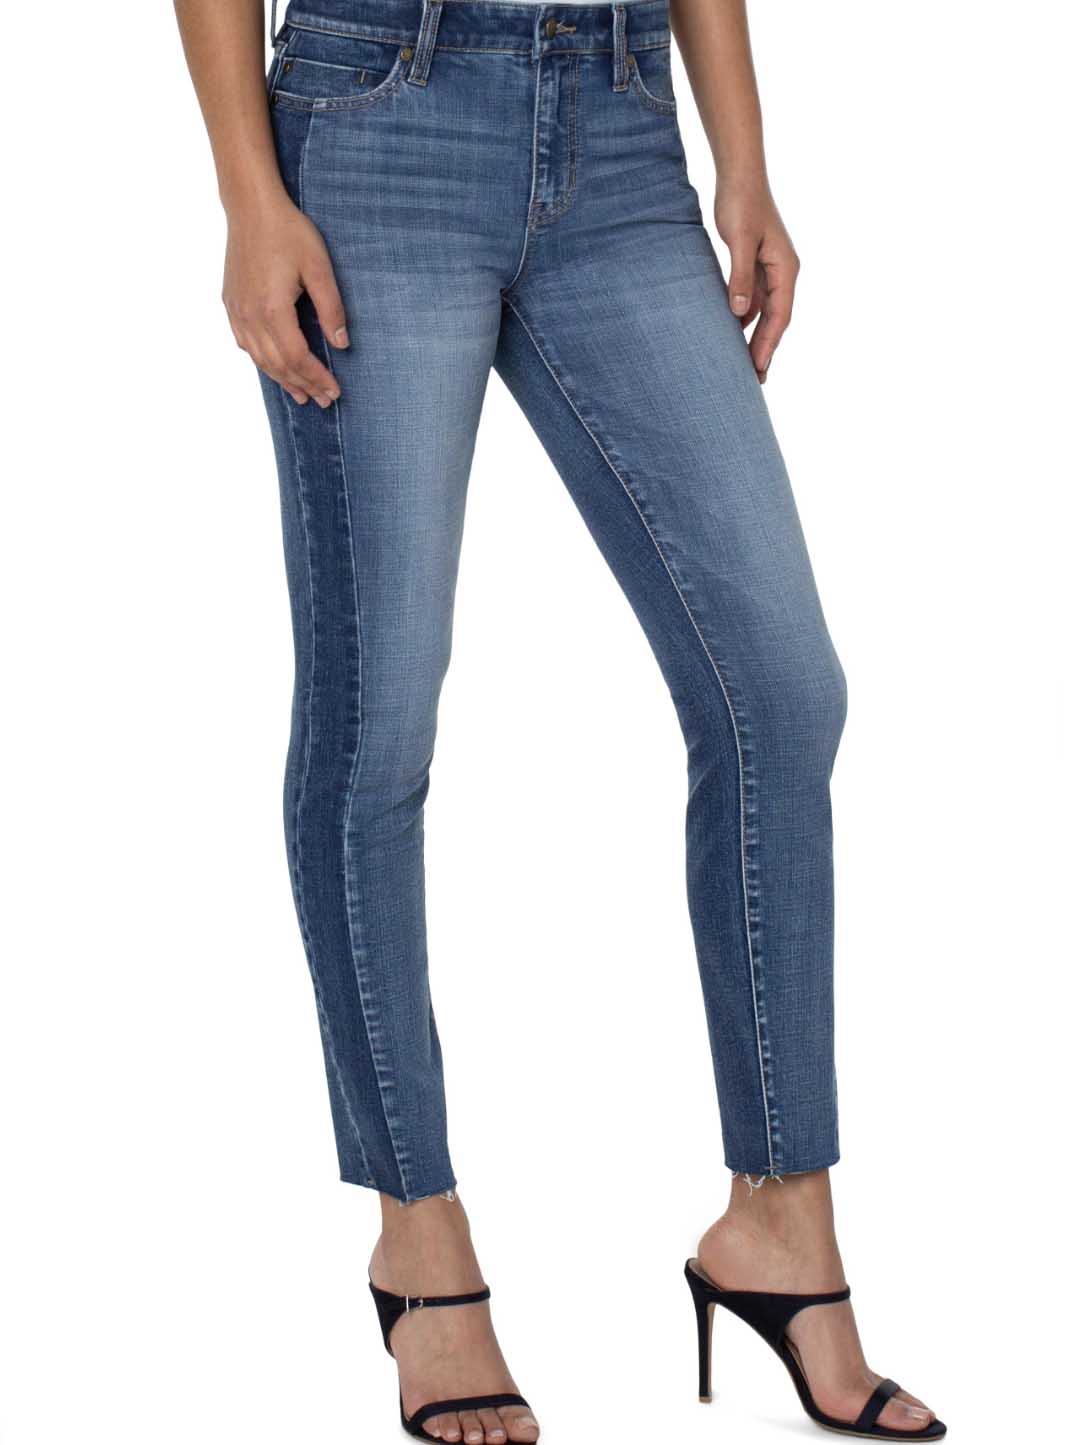 Alice + Olivia Stacey Bell Bottom Jeans